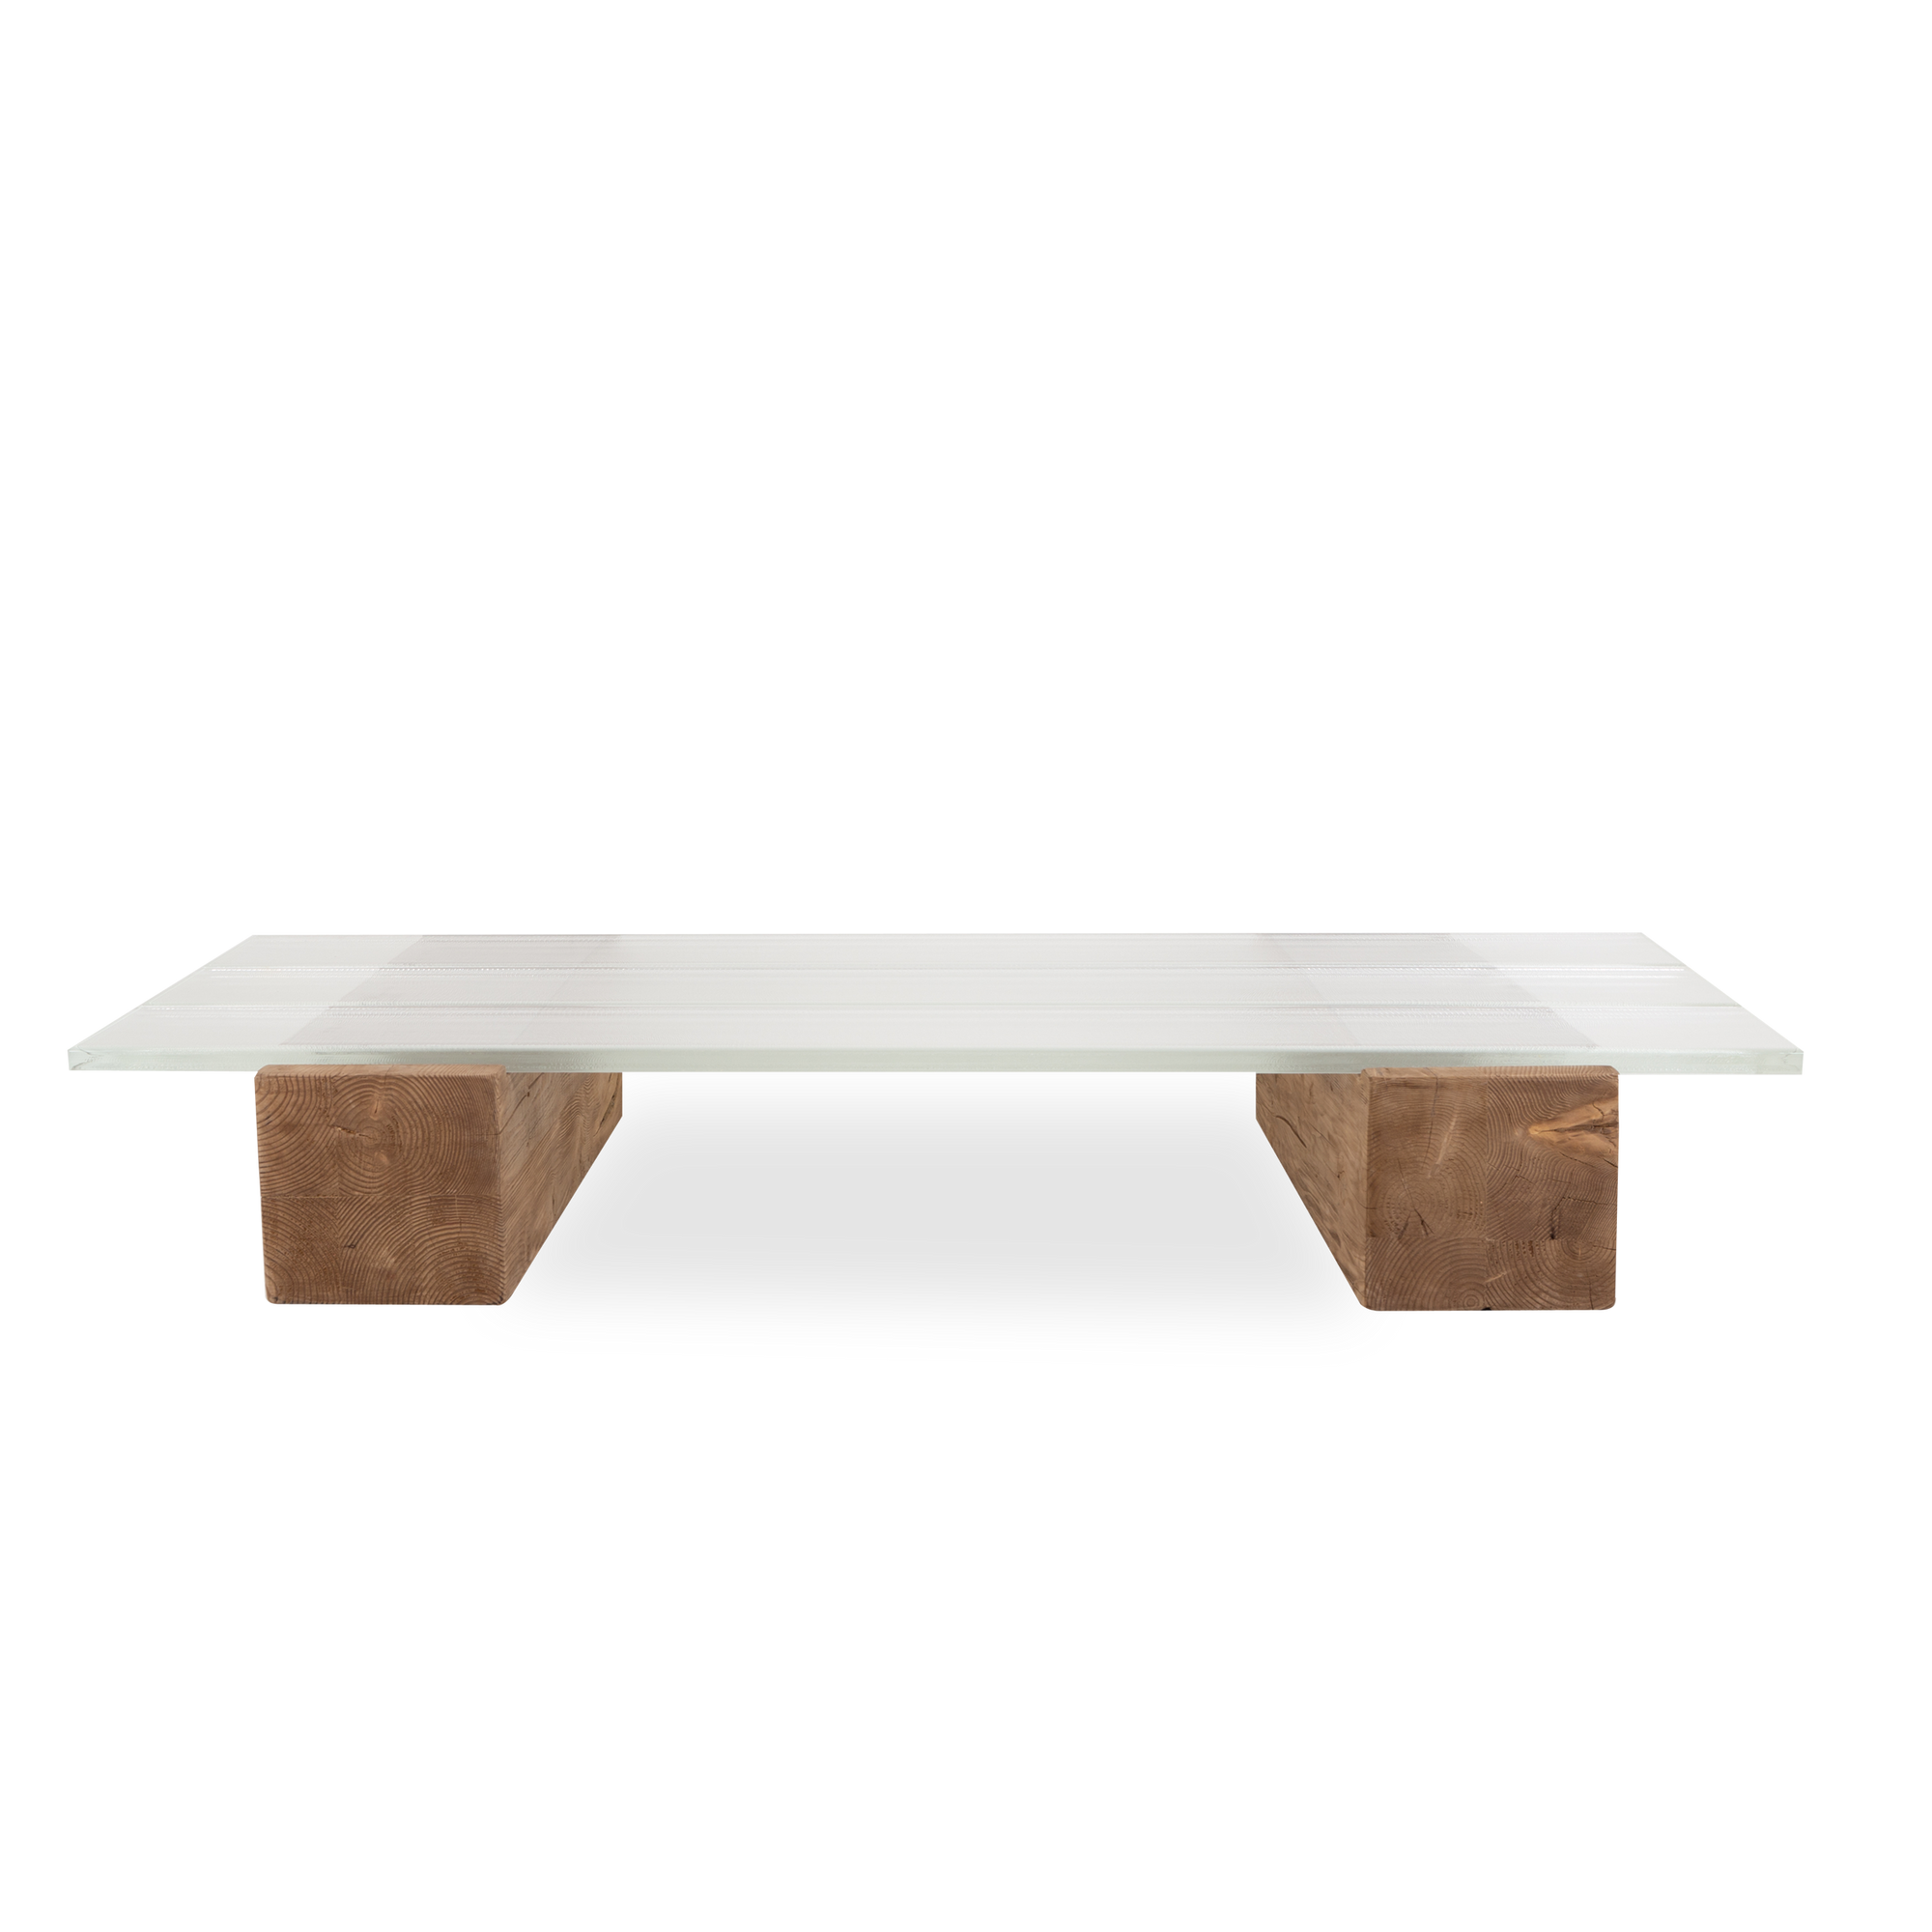 Proving the adage that there is beauty in simplicity, the epic Icebeam coffee table grounds a space with its mighty reclaimed timber blocks topped with three ice-like beams of glas